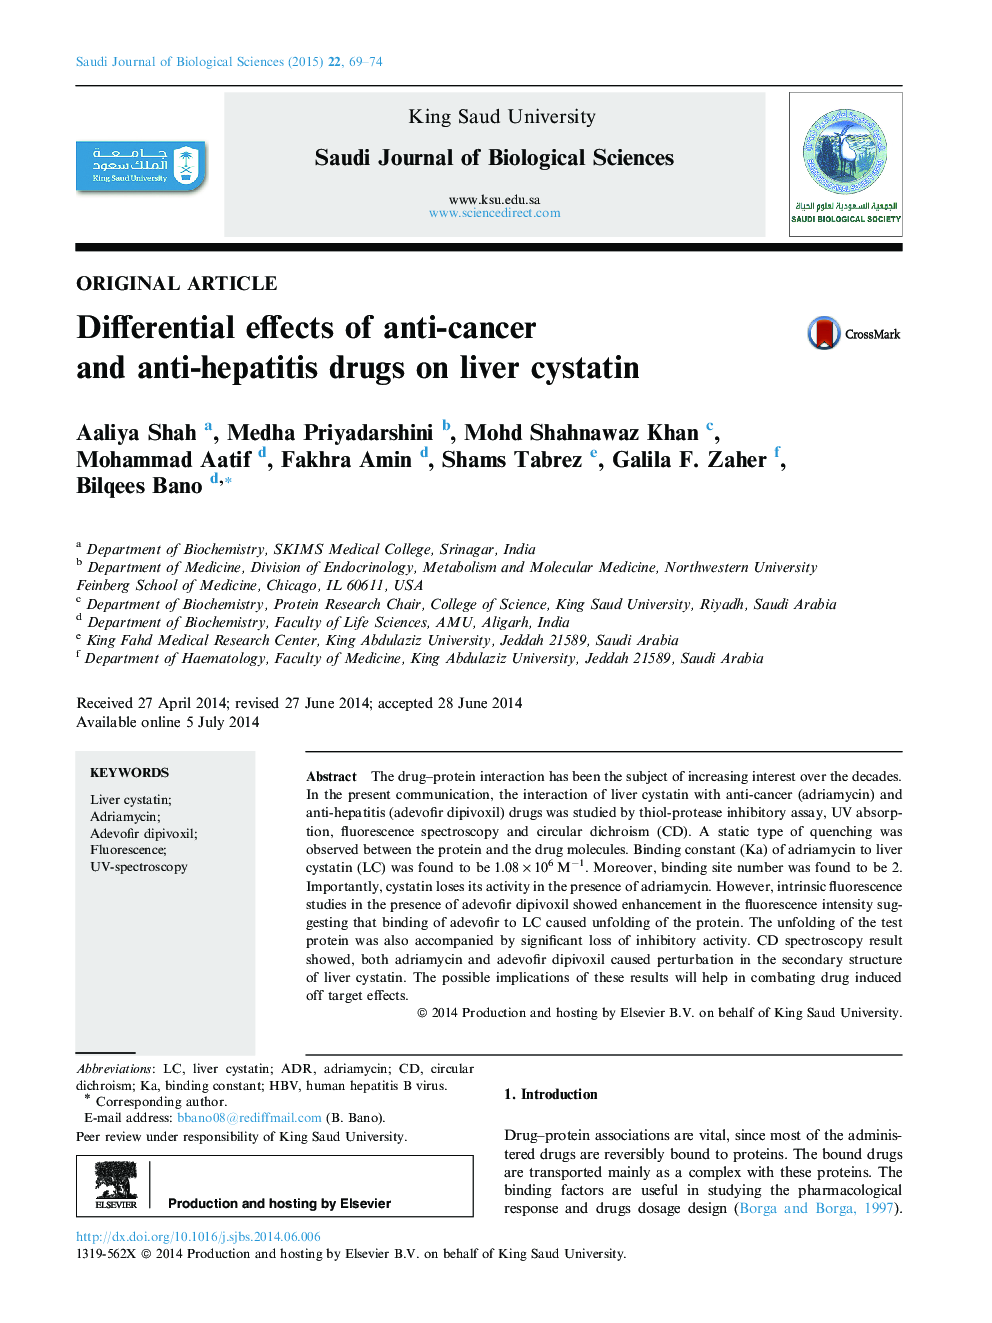 Differential effects of anti-cancer and anti-hepatitis drugs on liver cystatin 